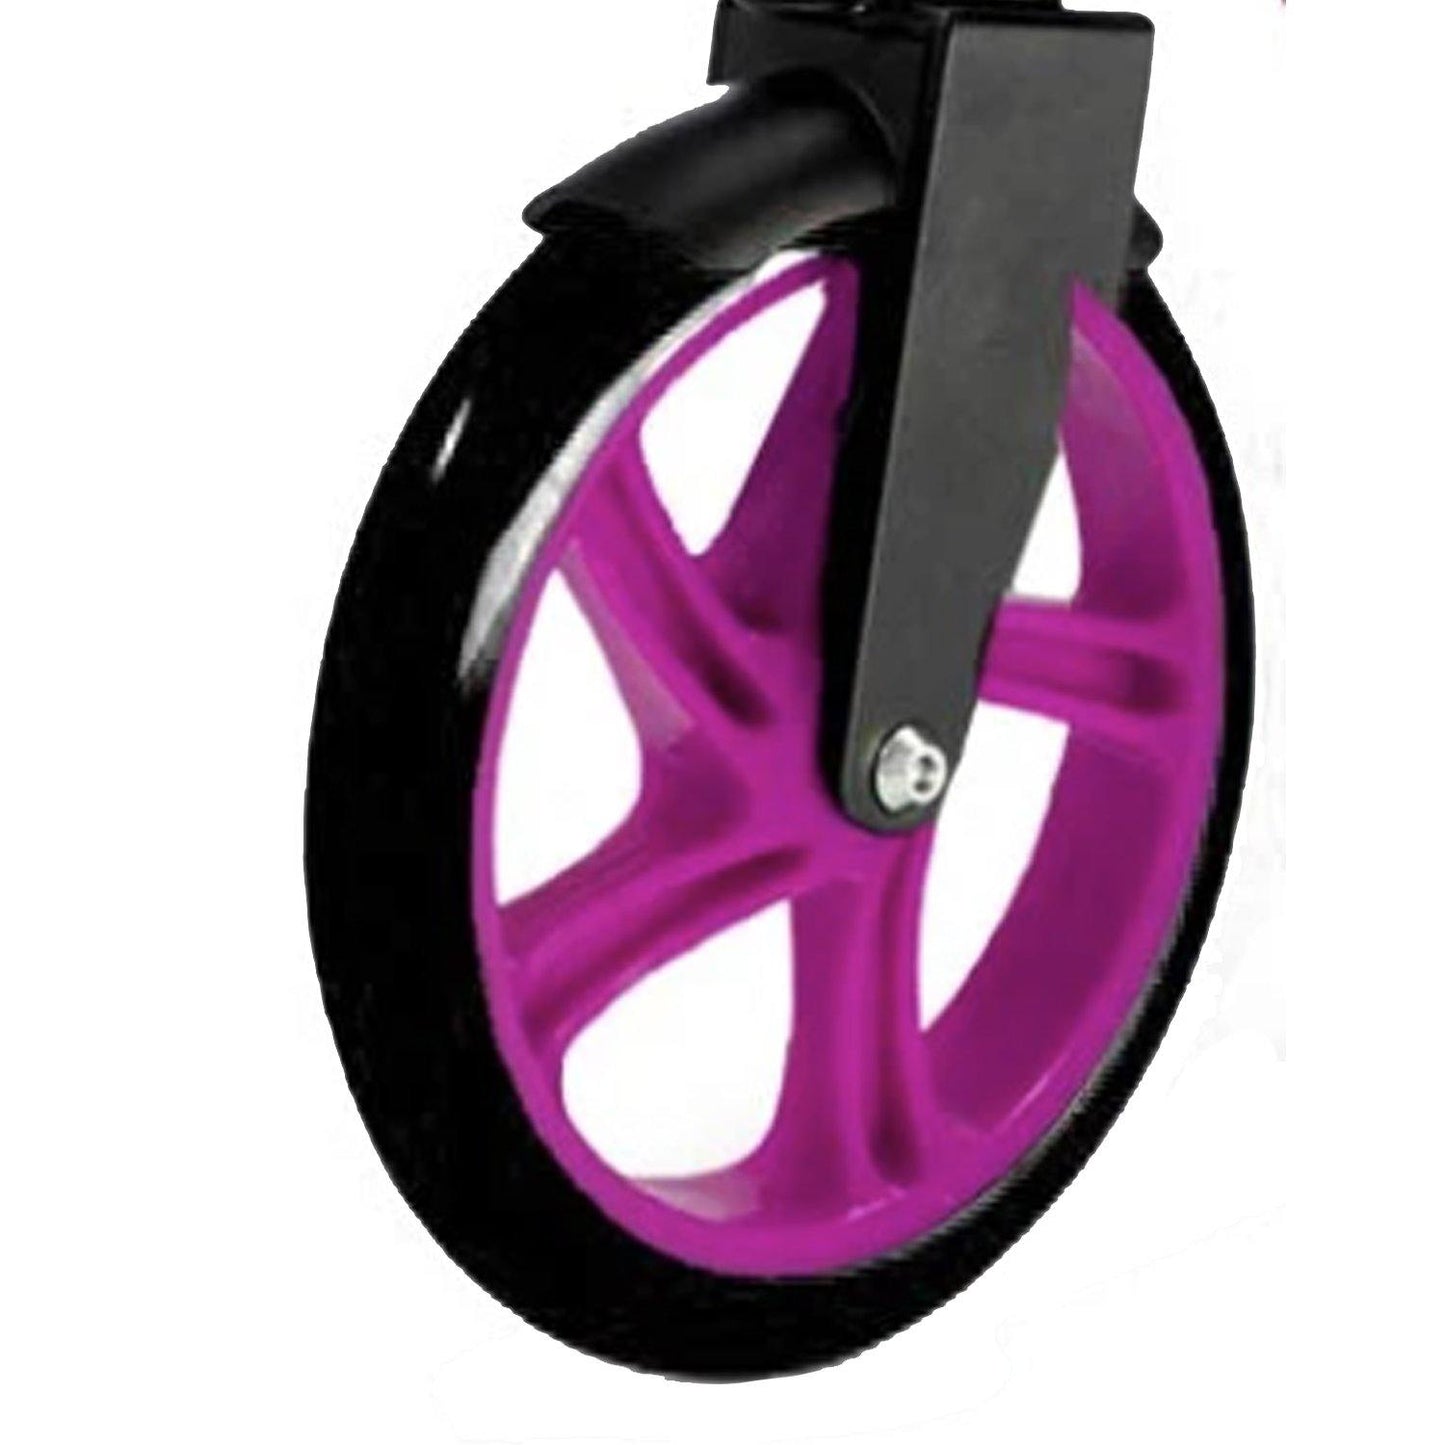 Teen Scooter Front Back Wheel - LaScoota